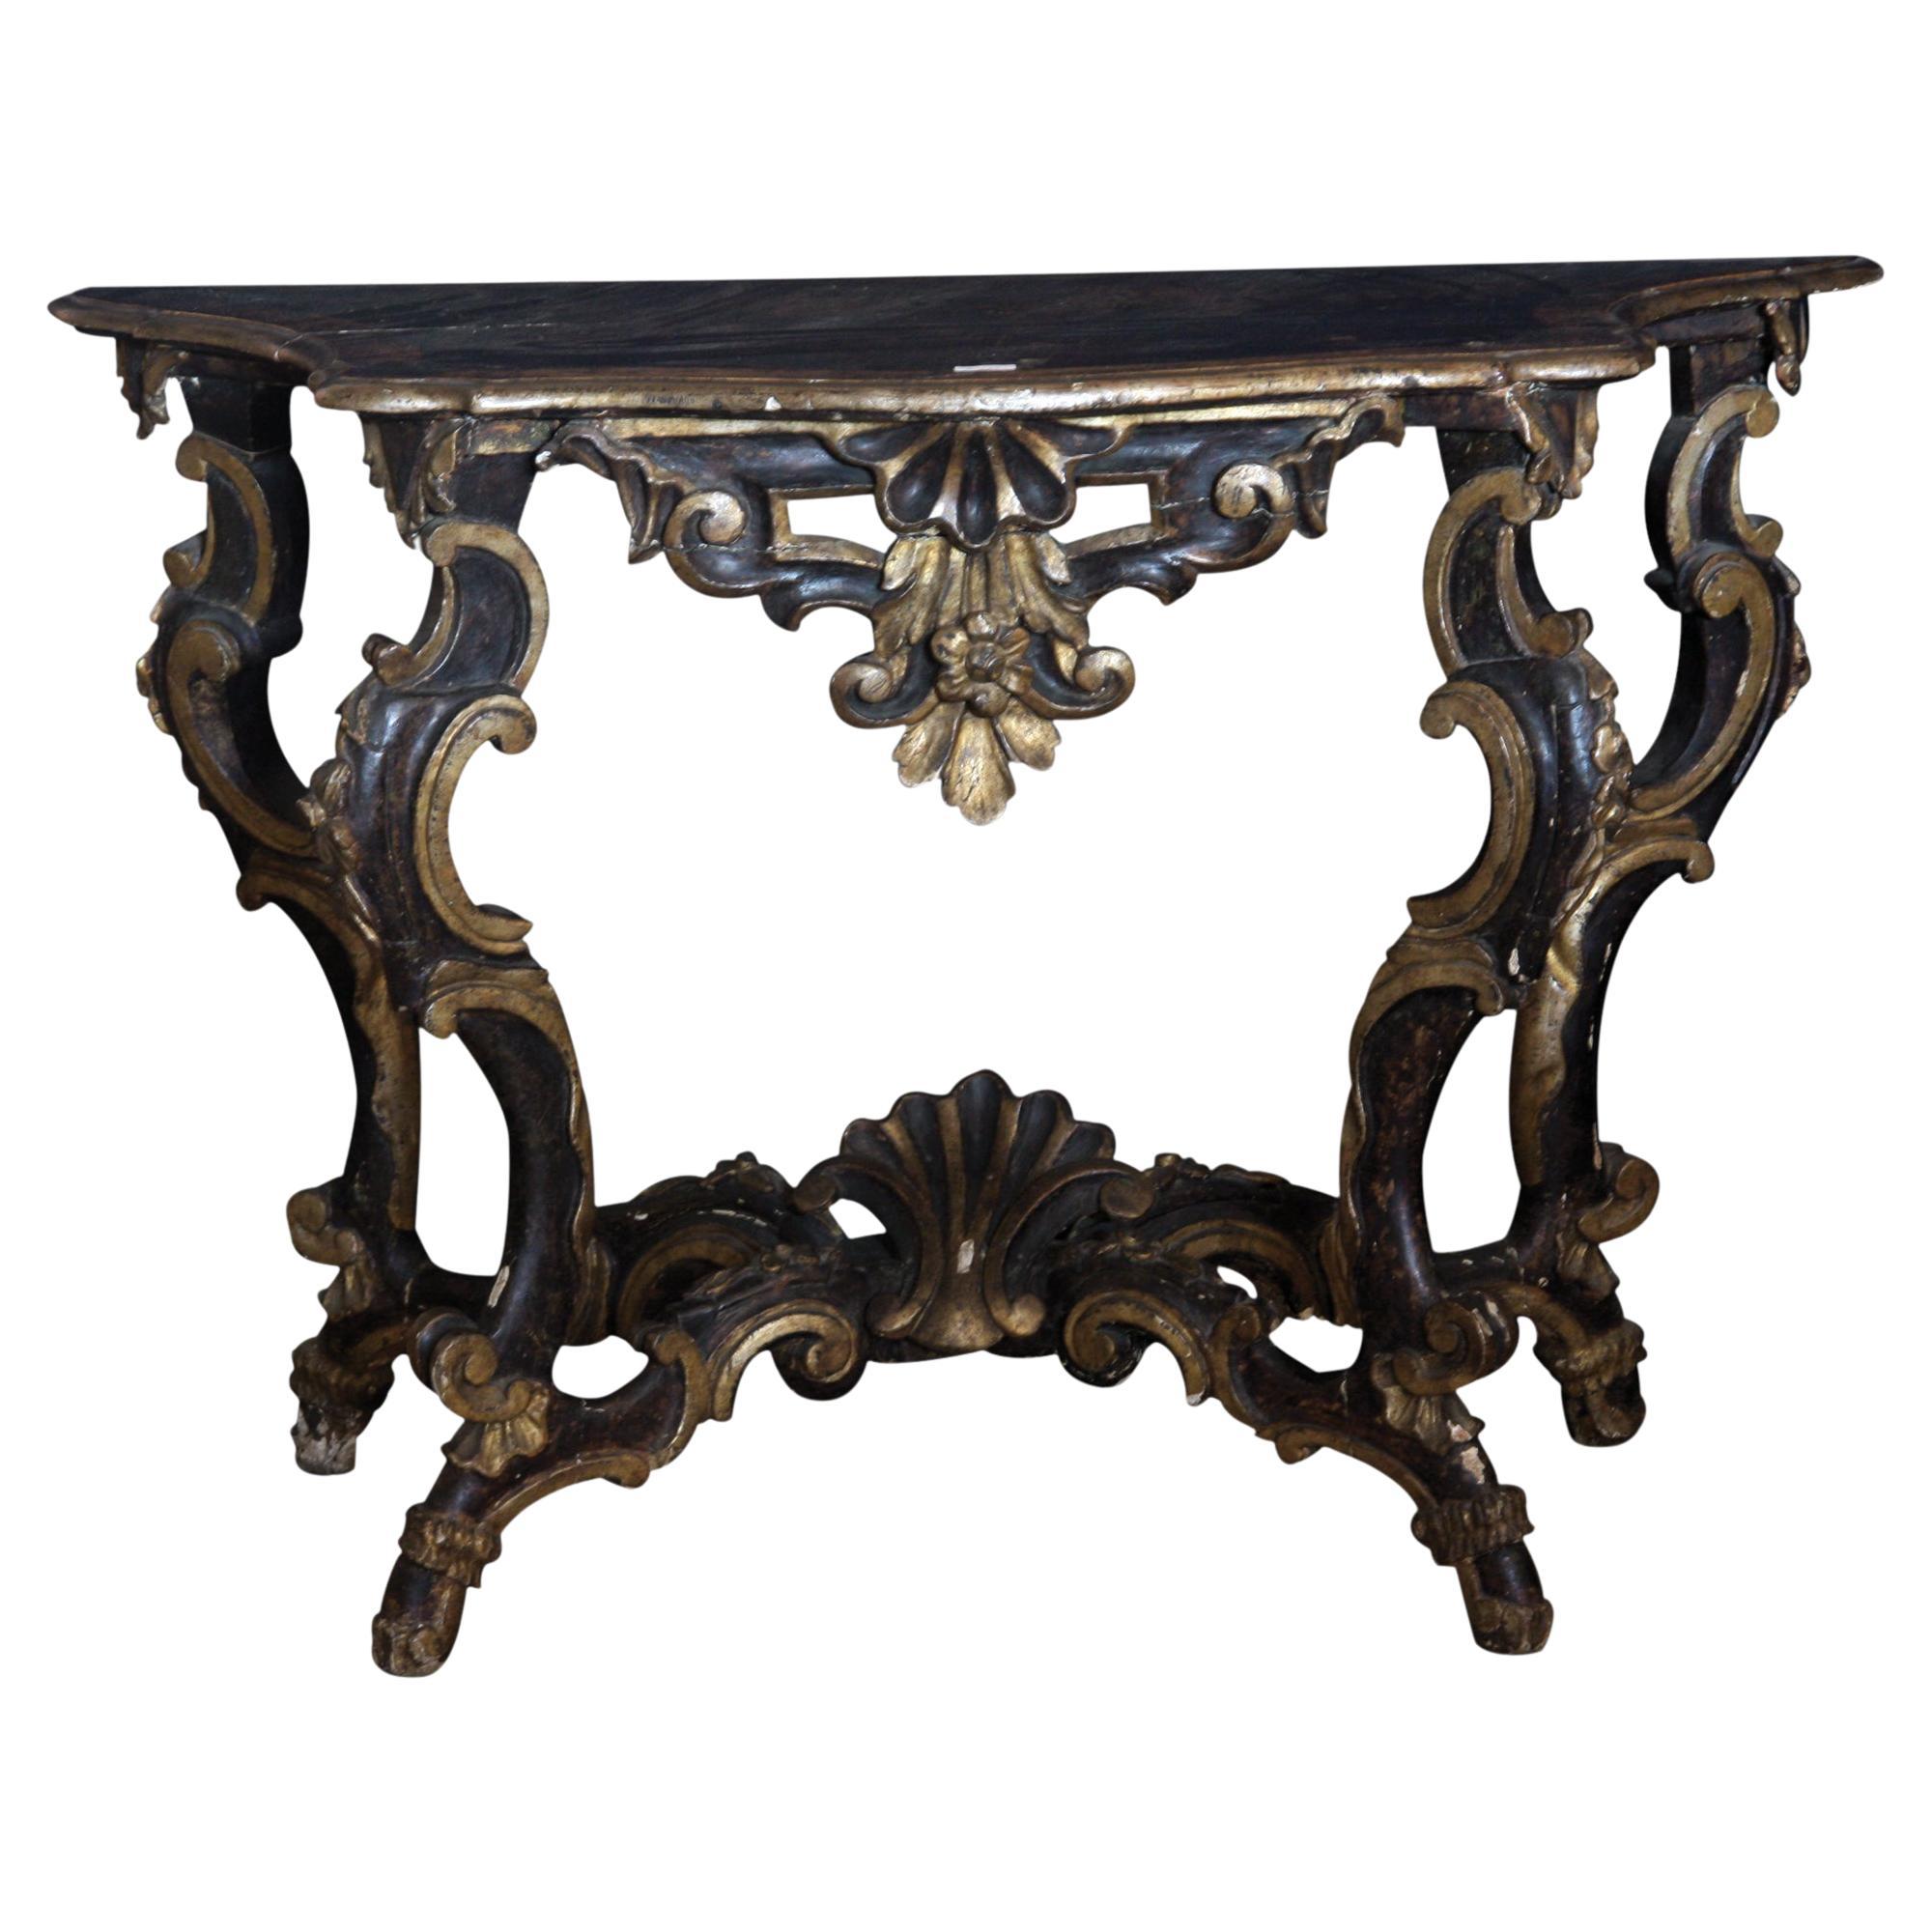 Console Tables Lacquered and Gilded Louis XIV Period